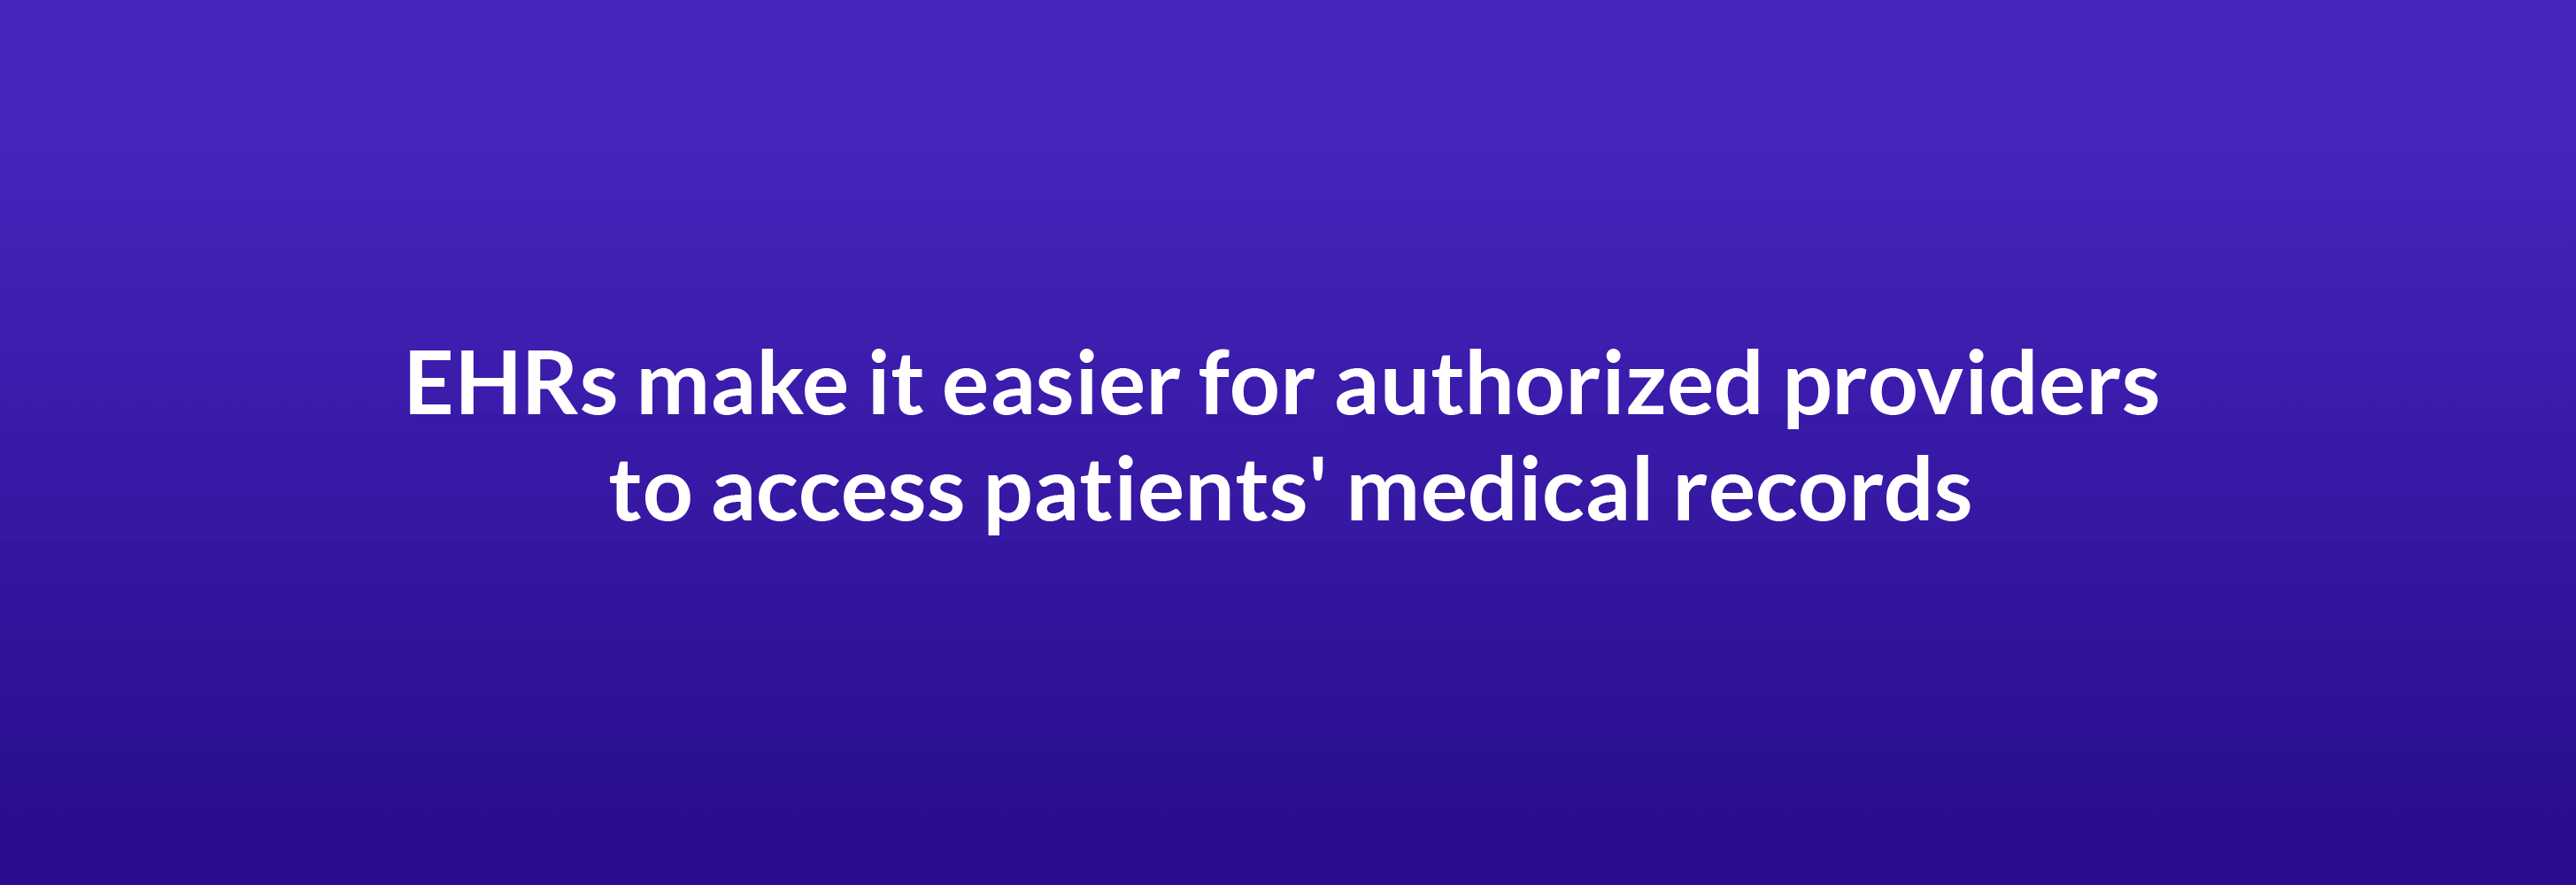 EHRs make it easier for authorized providers to access patients' medical records